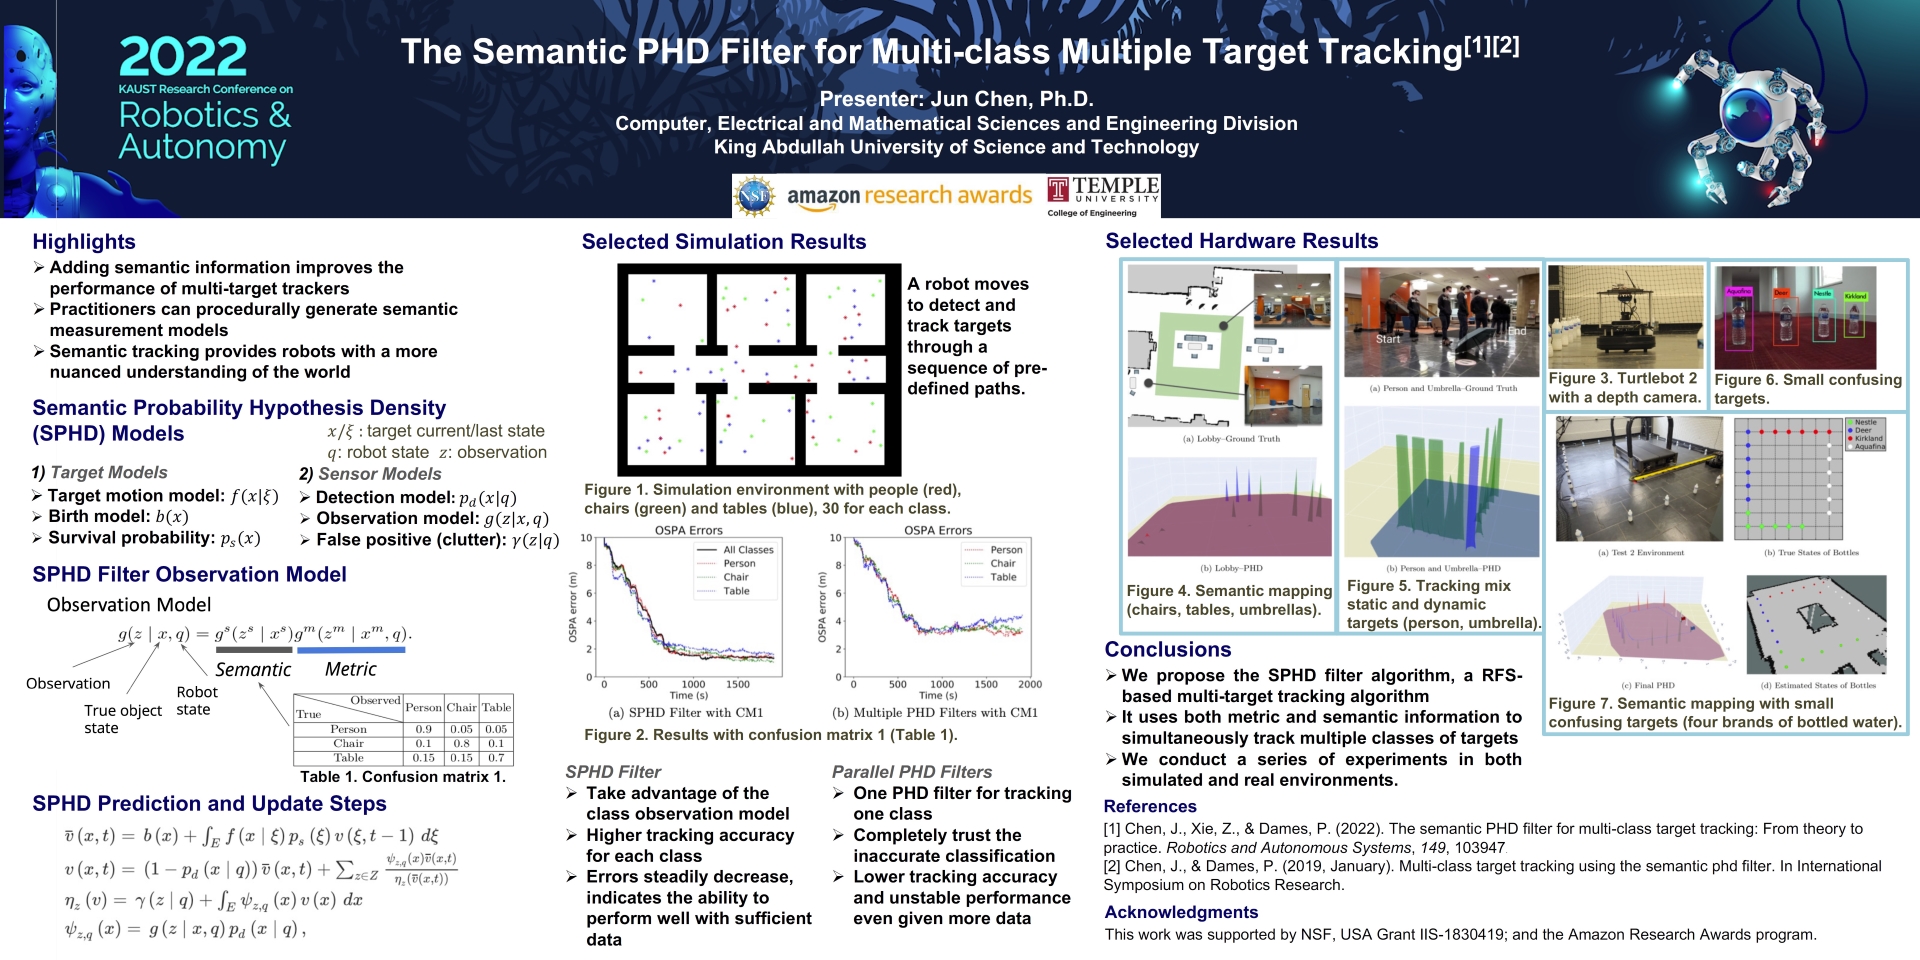 Jun Chen_The Semantic PHD Filter for Multi-class Multiple Target Tracking